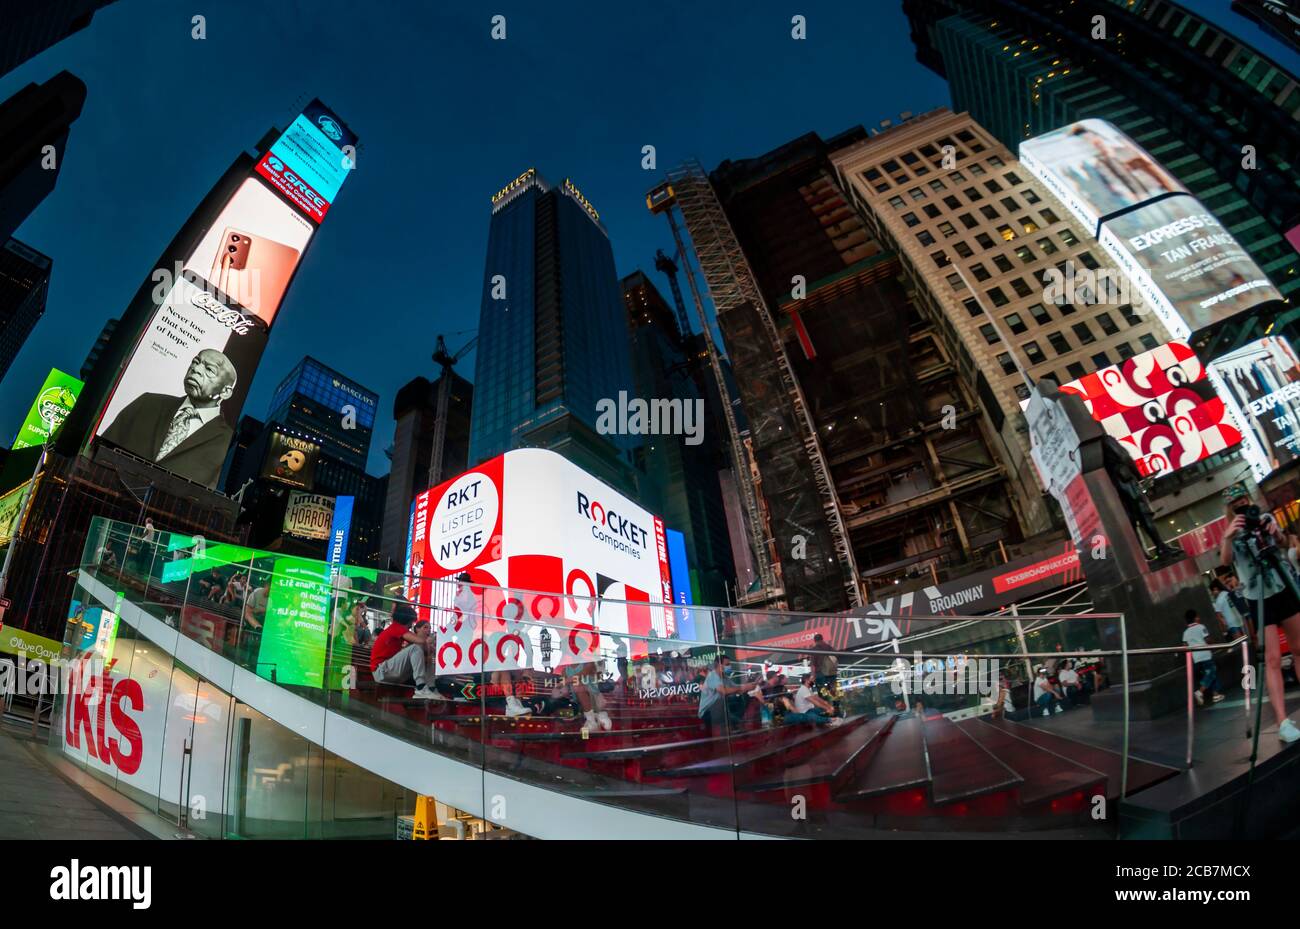 Giant video screens in Times Square in New York on Thursday, August 6, 2020 commemorate the initial public offering of the Rocket Companies which debuted on the New York Stock Exchange. Rocket Cos. is the parent of Quicken Loans(© Richard B. Levine) Stock Photo